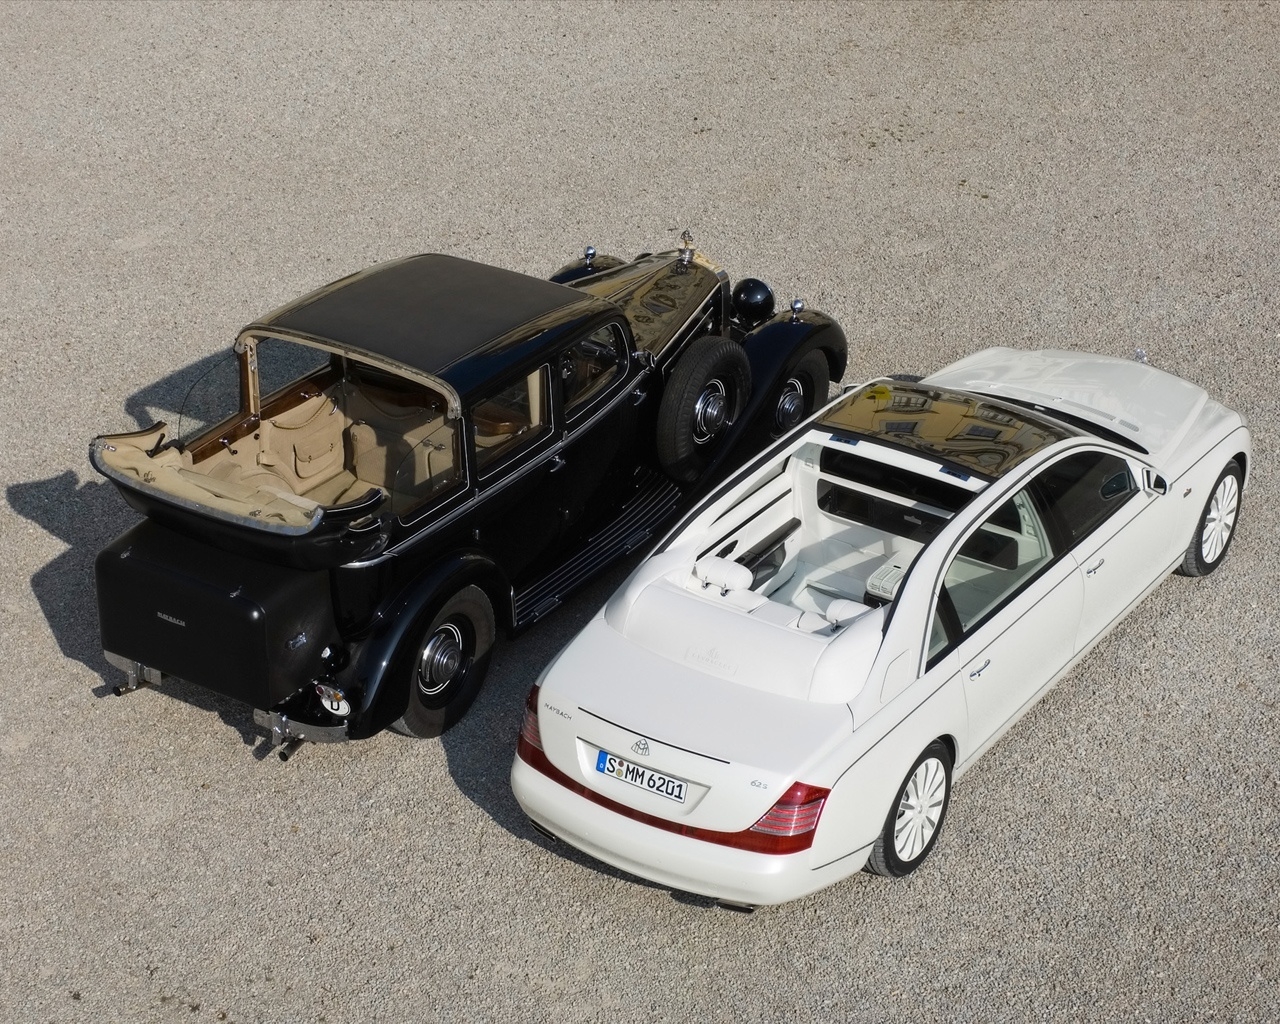 Maybach Landaulet 2007 Study Duo Rear Angle Top for 1280 x 1024 resolution